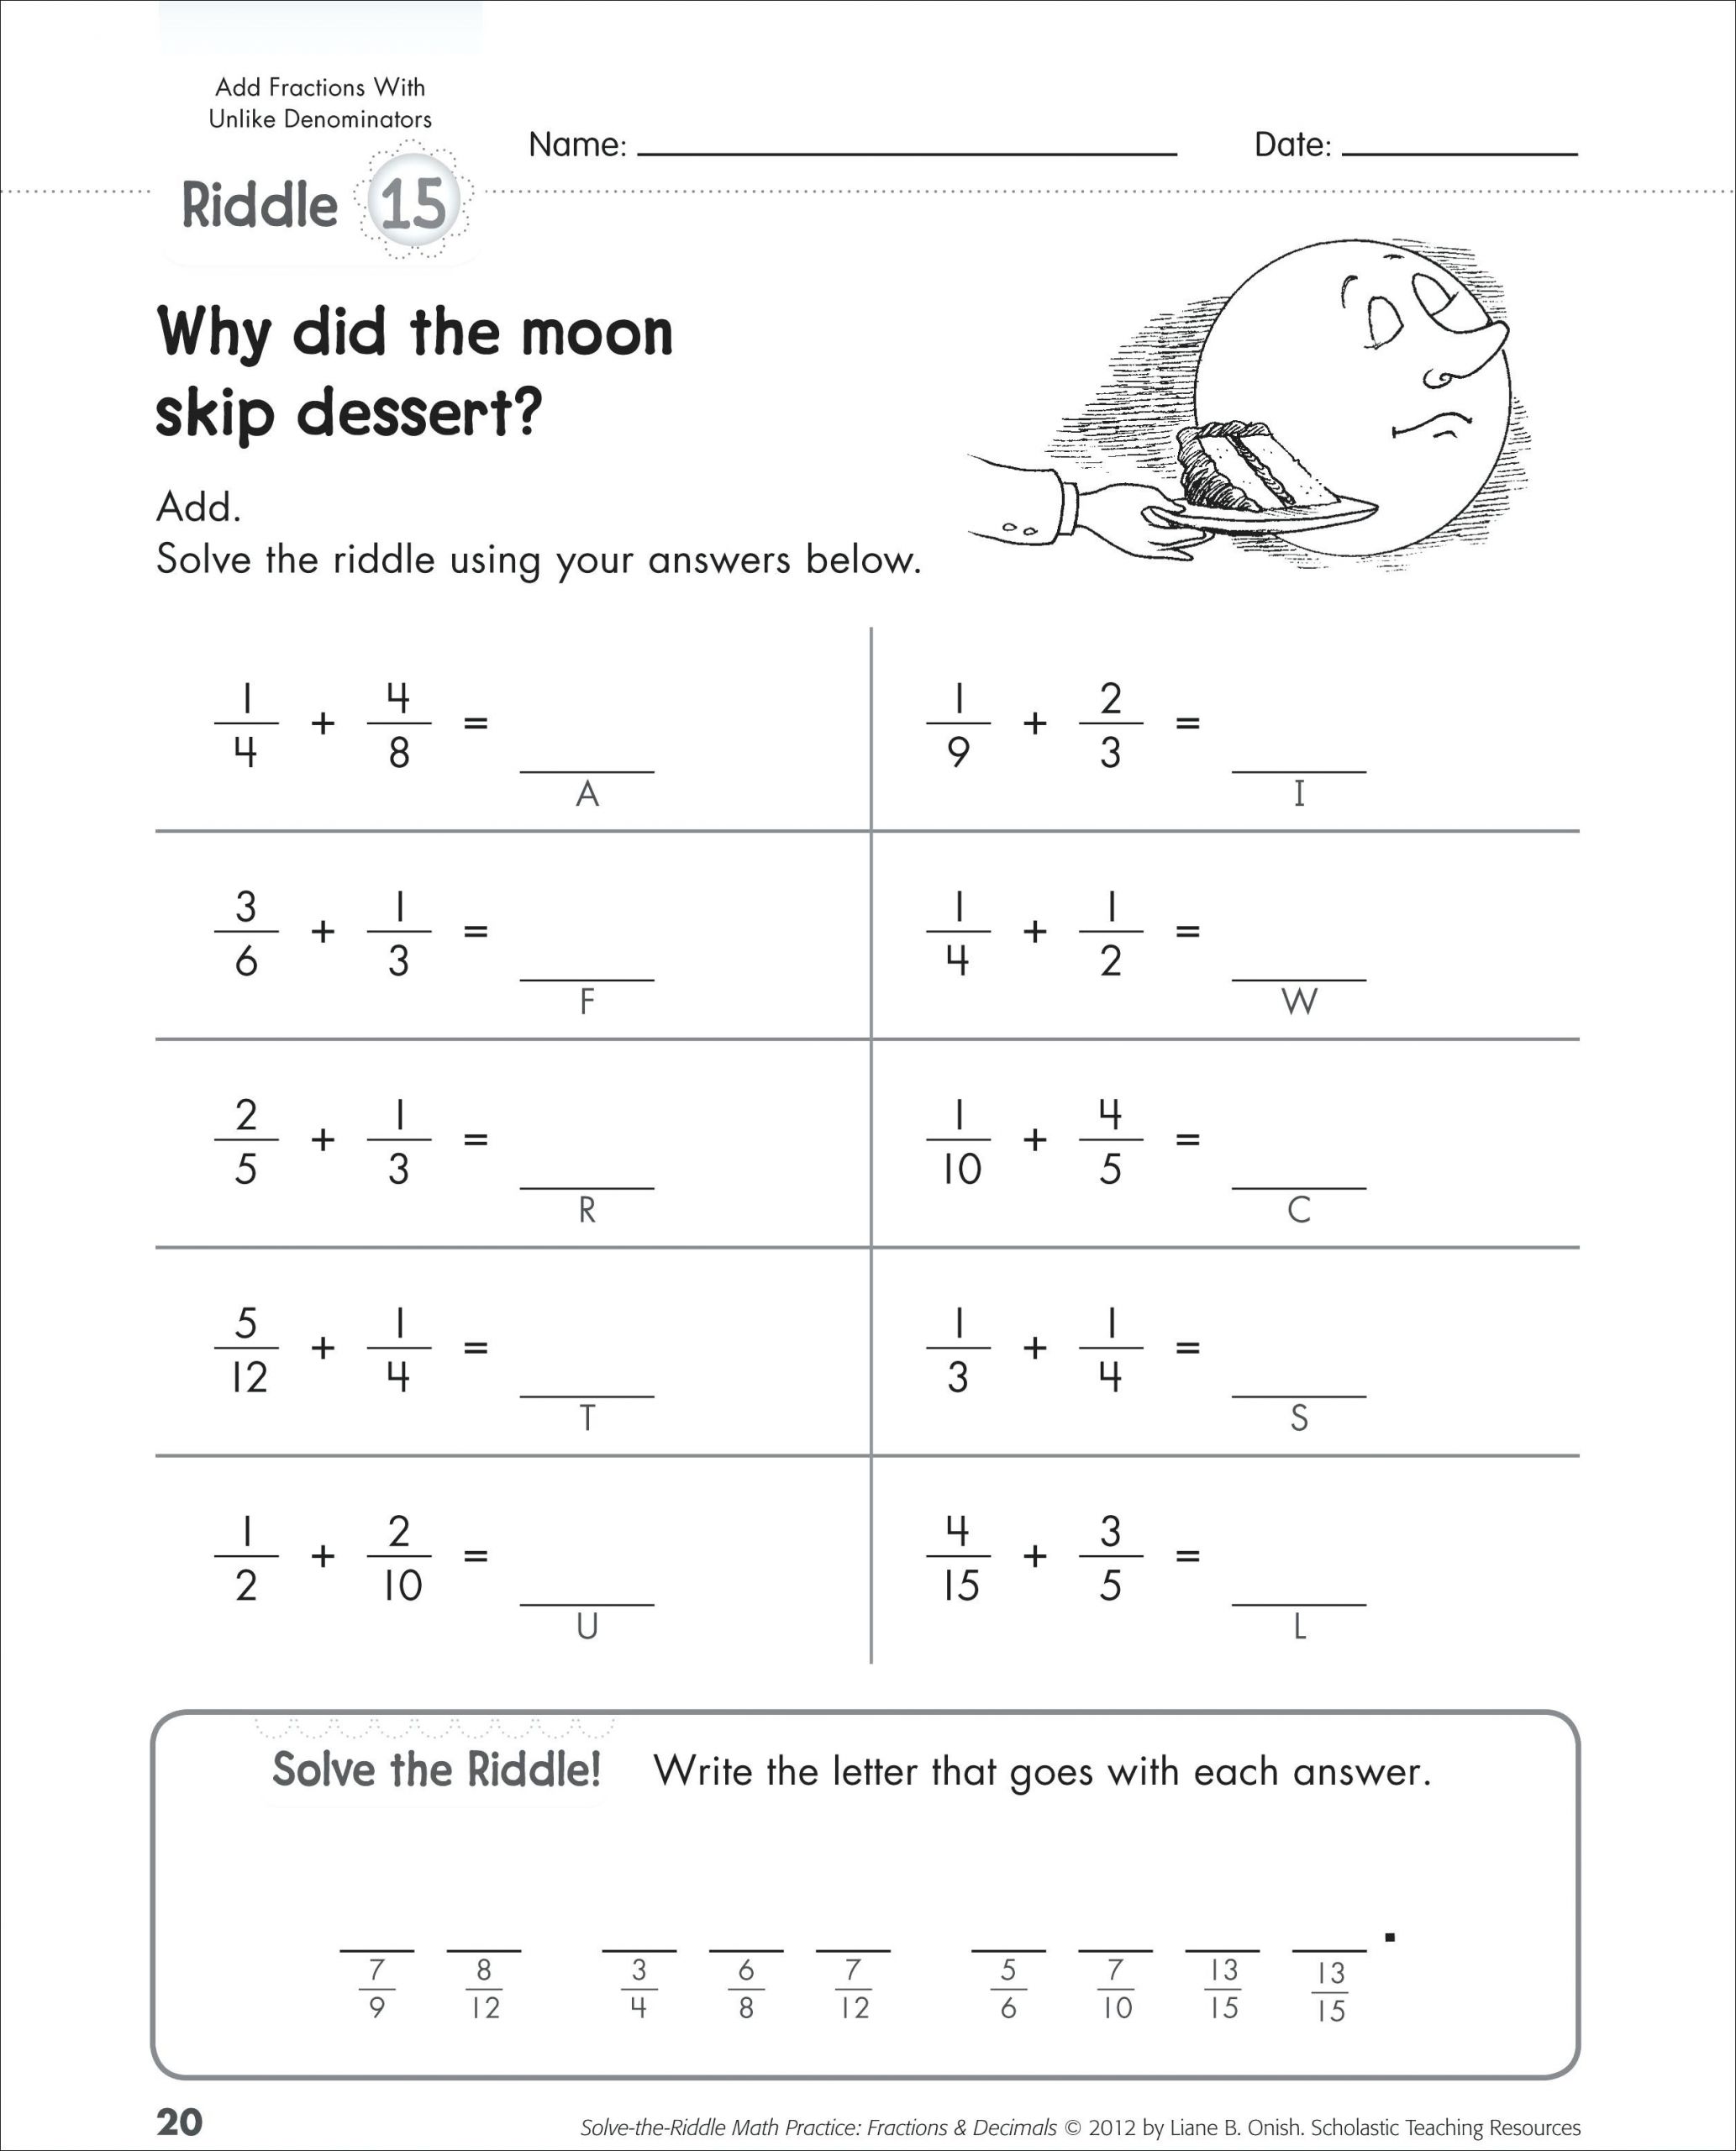 adding fractions worksheets to free